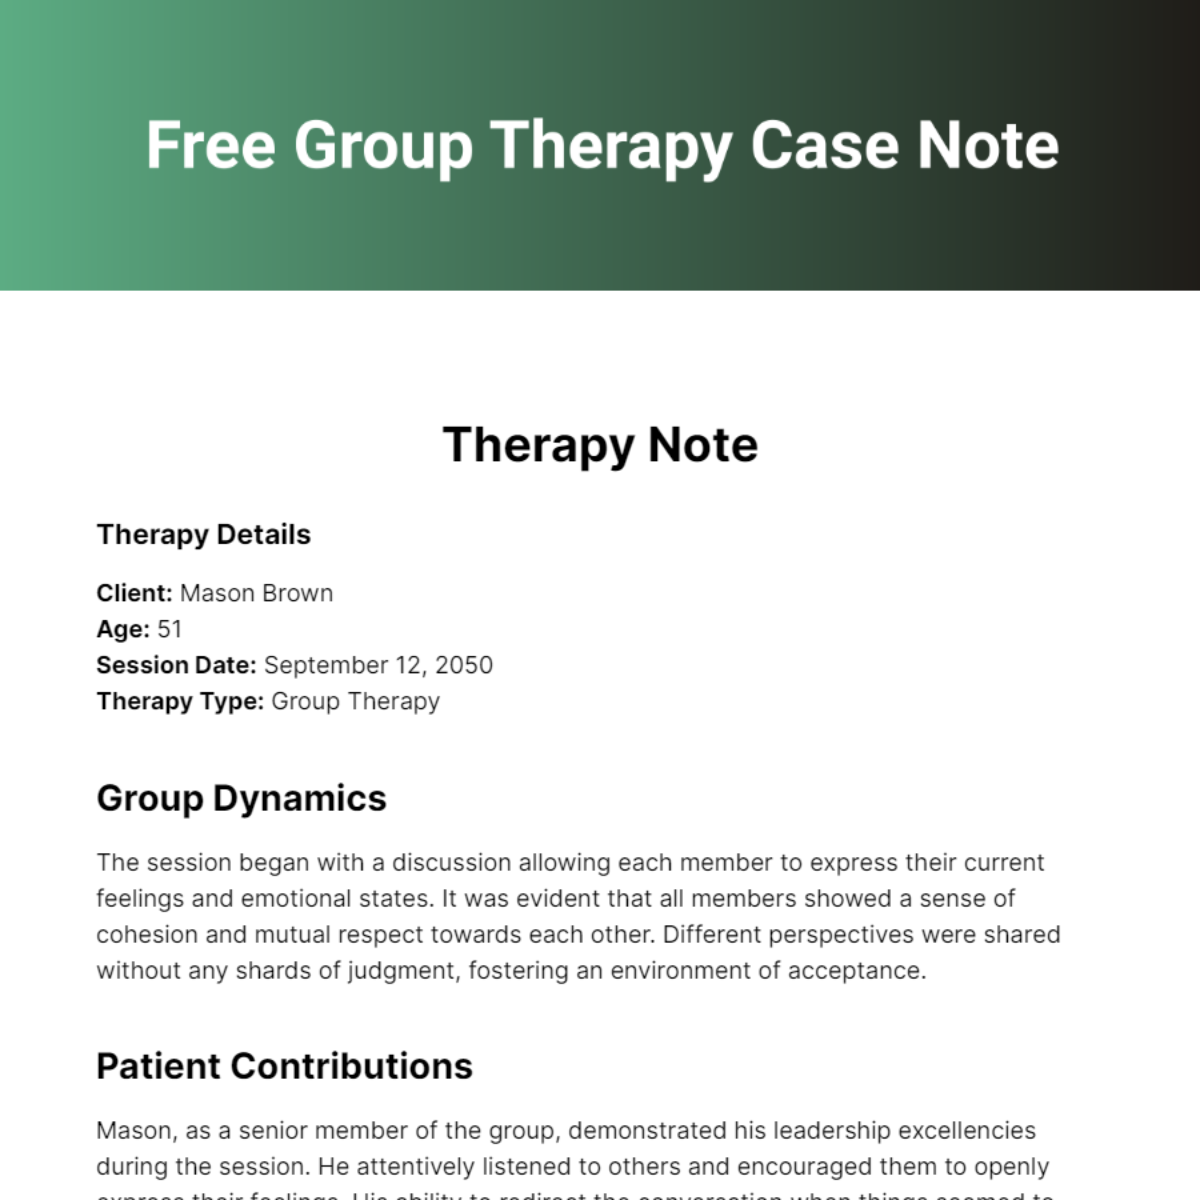 Free Group Therapy Case Note Template